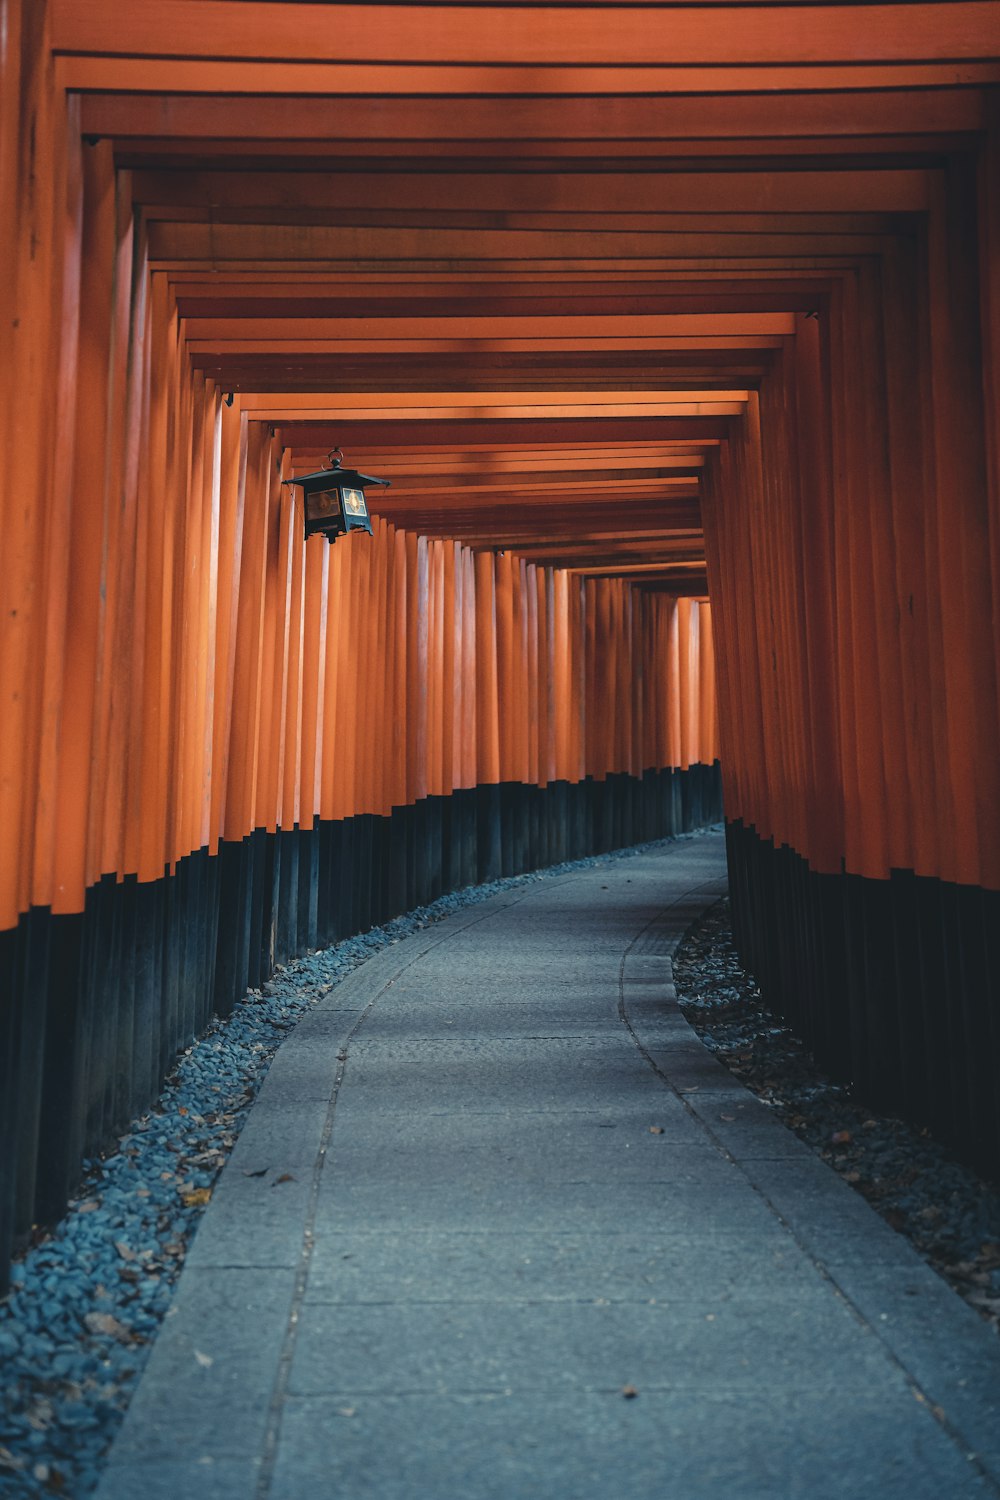 a long walkway lined with orange wooden pillars